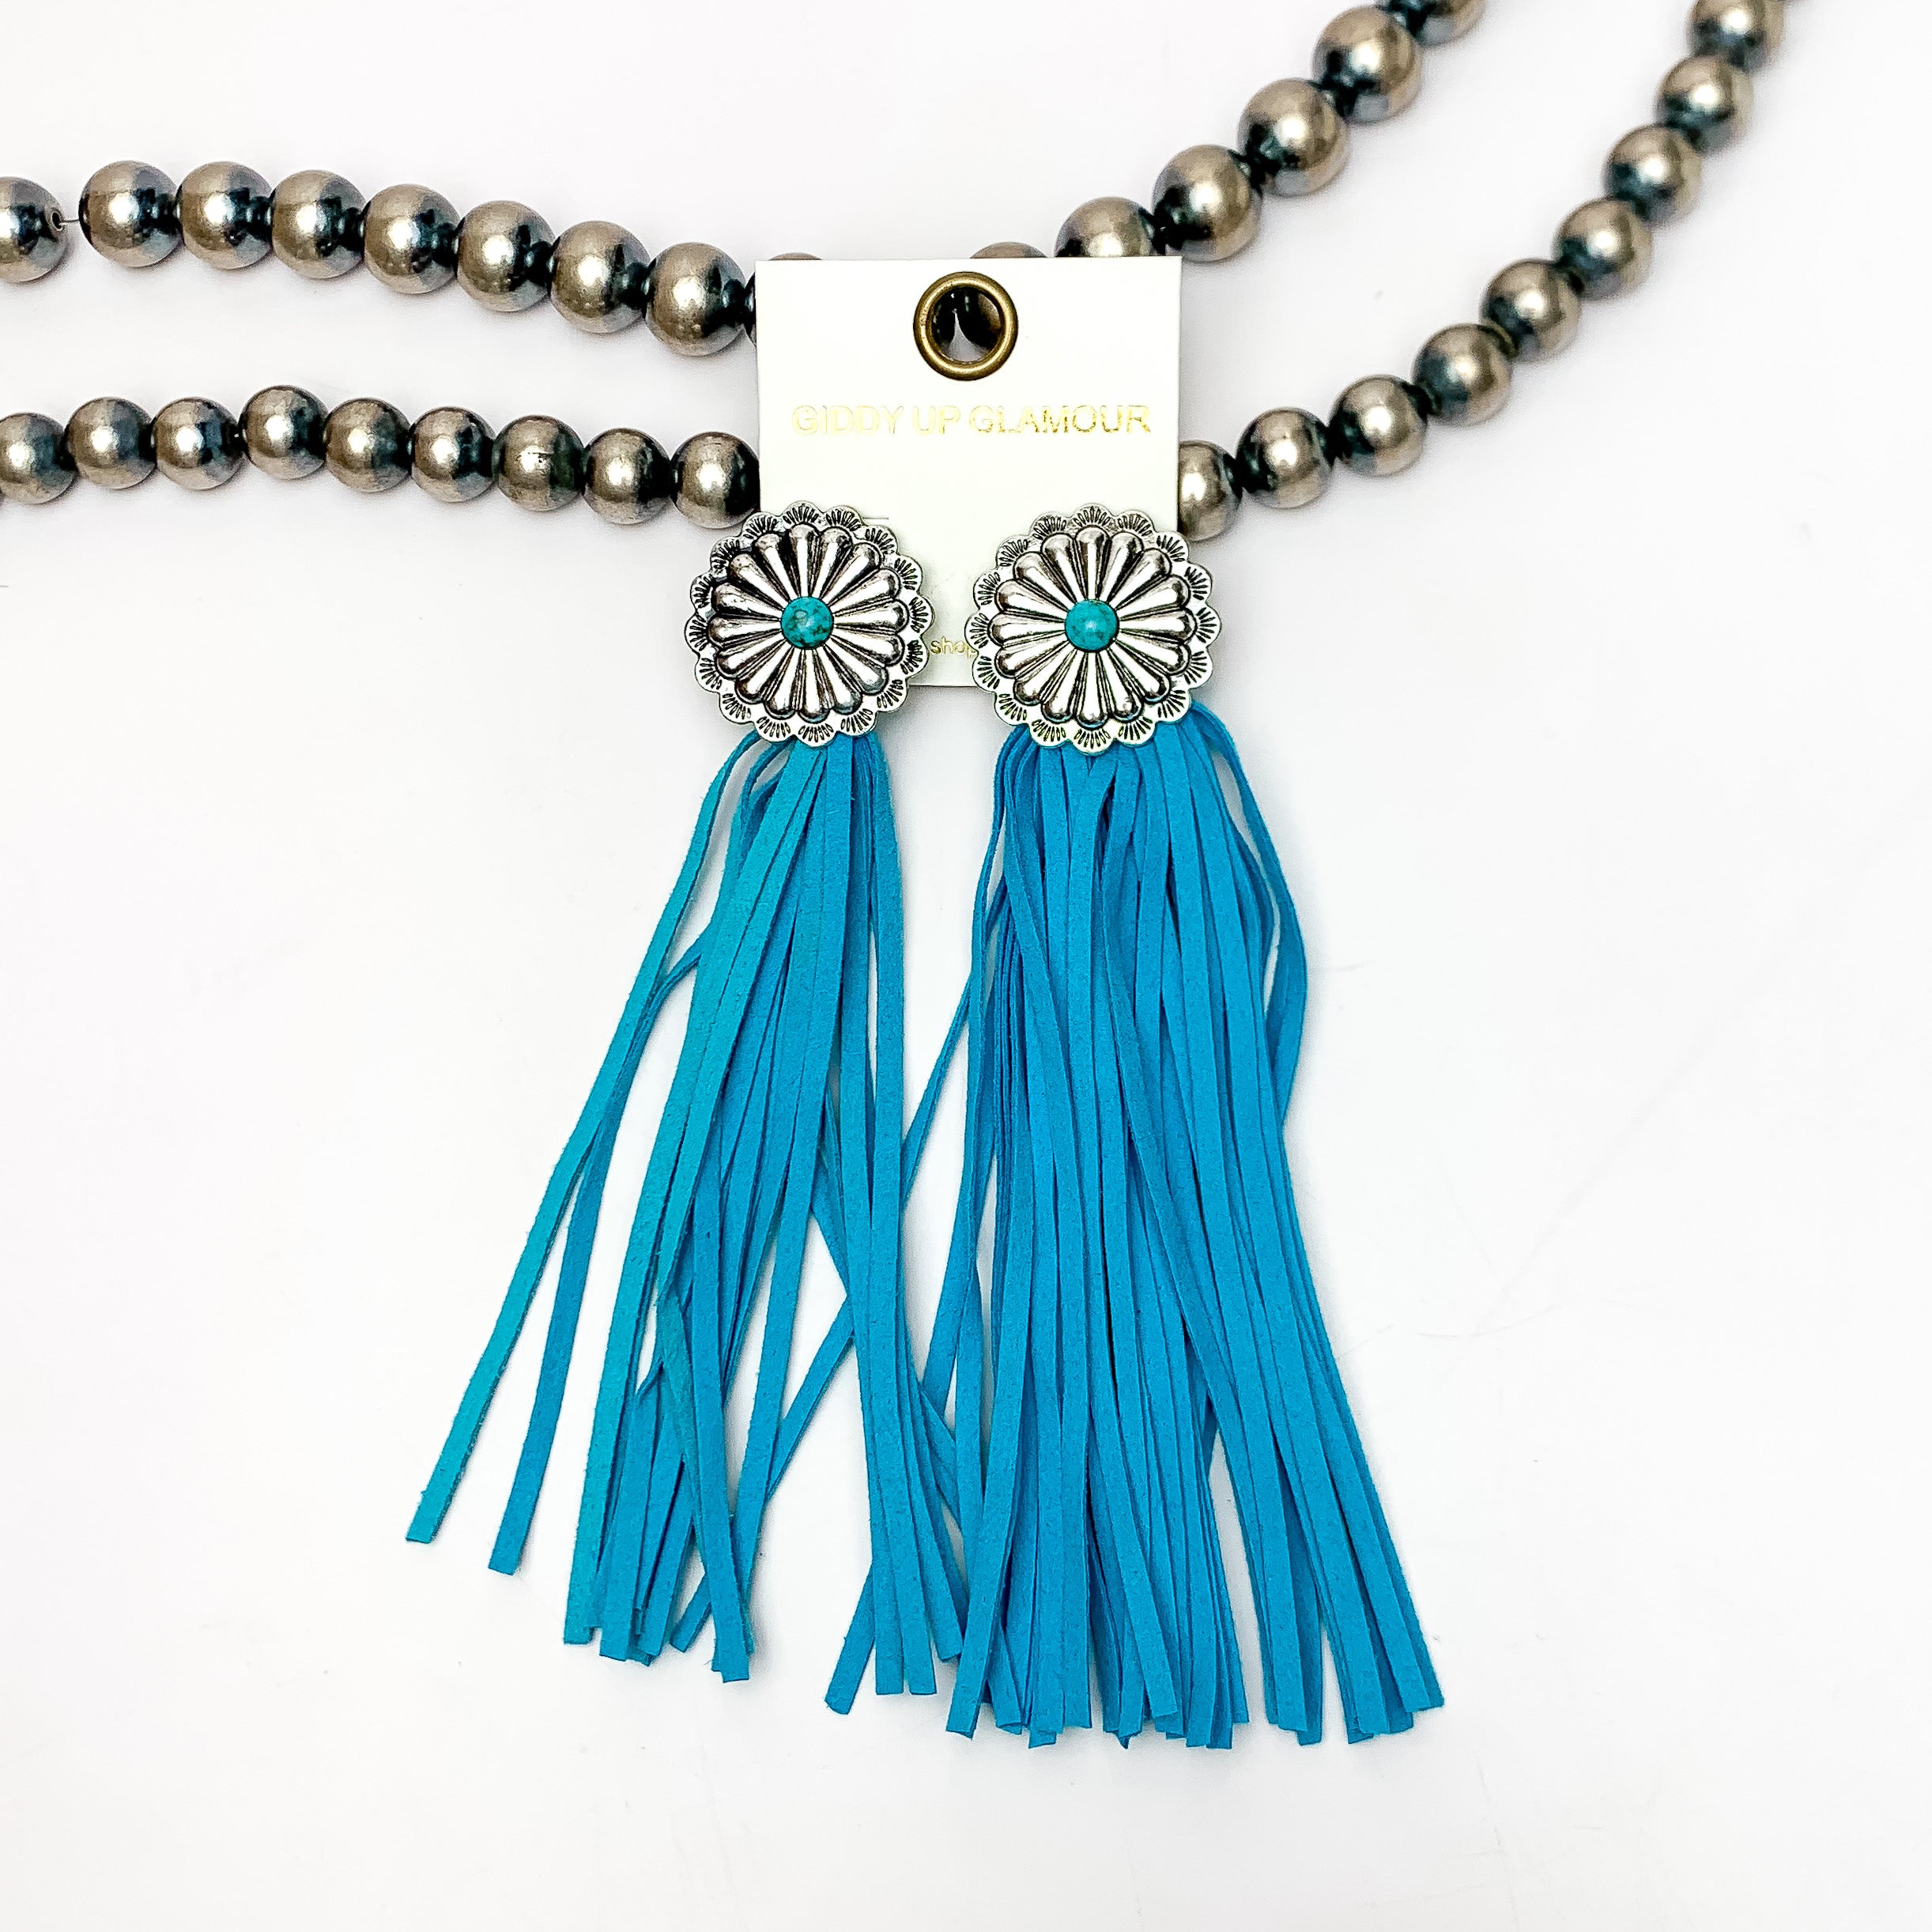 Rodeo Runway Tassel Earrings in Turquoise Blue. These tassel earrings are pictured on white background with them laying on Navajo peals.